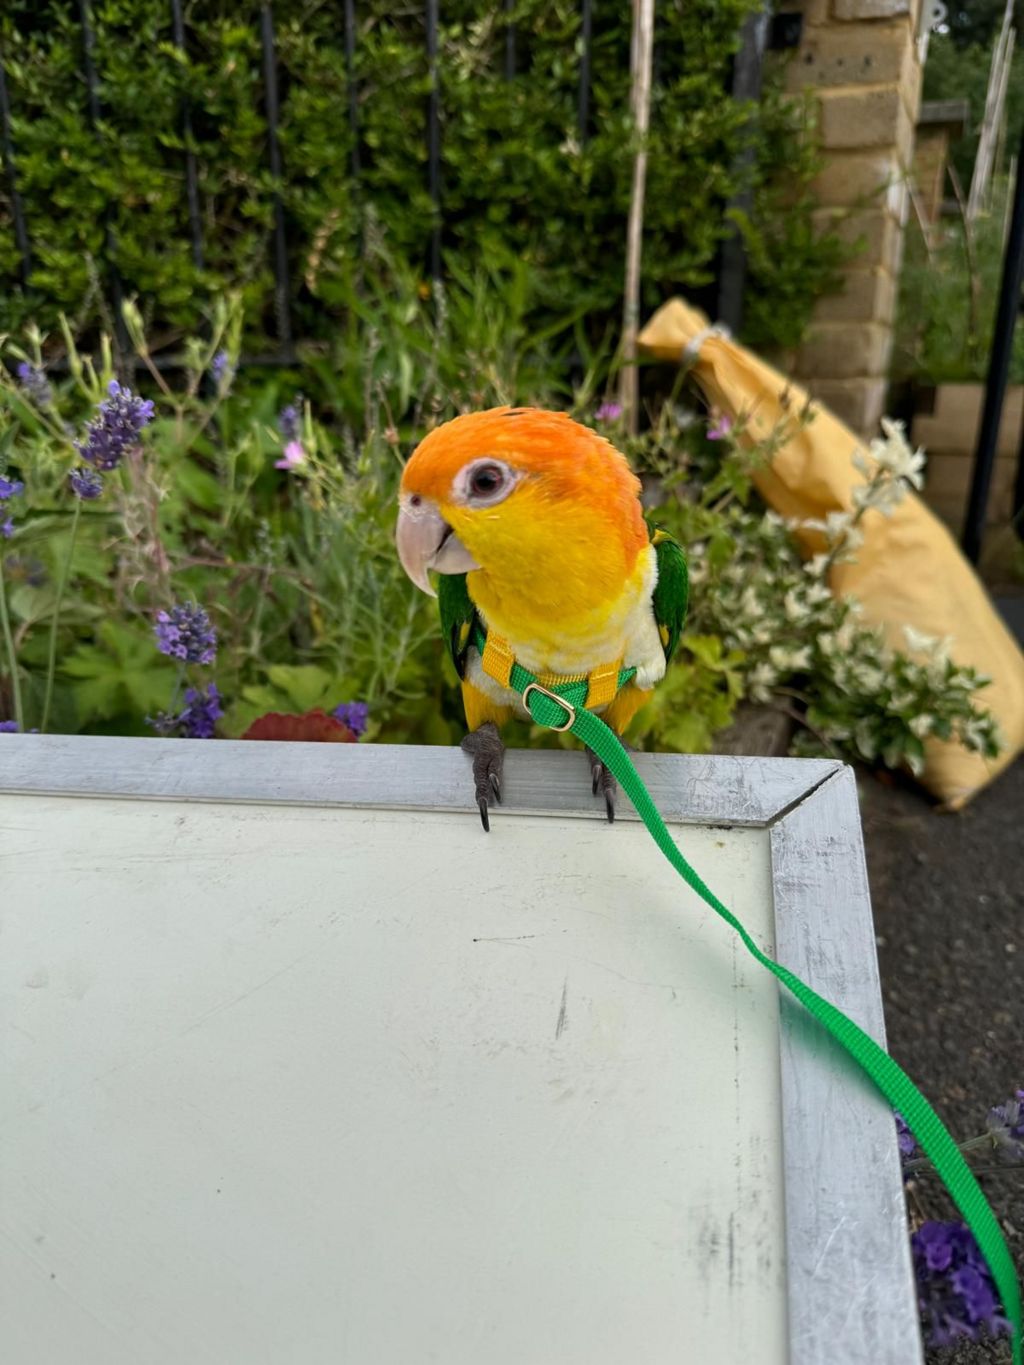 A parrot with a yellow face and green leash.